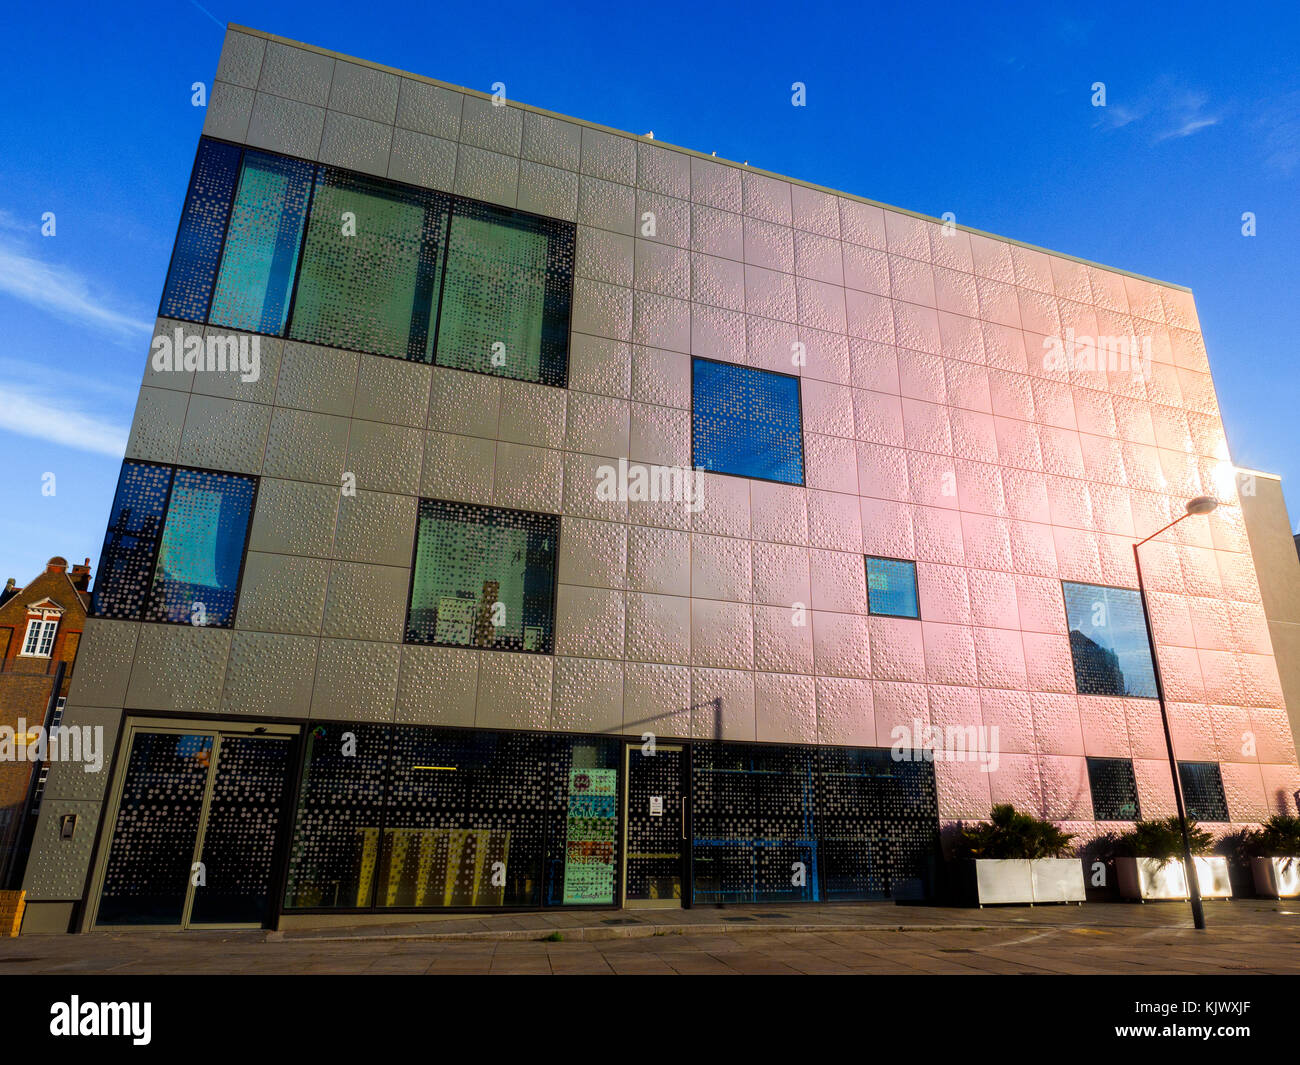 Spotlight is a creative youth service designed to inspire - London, England  Stock Photo - Alamy